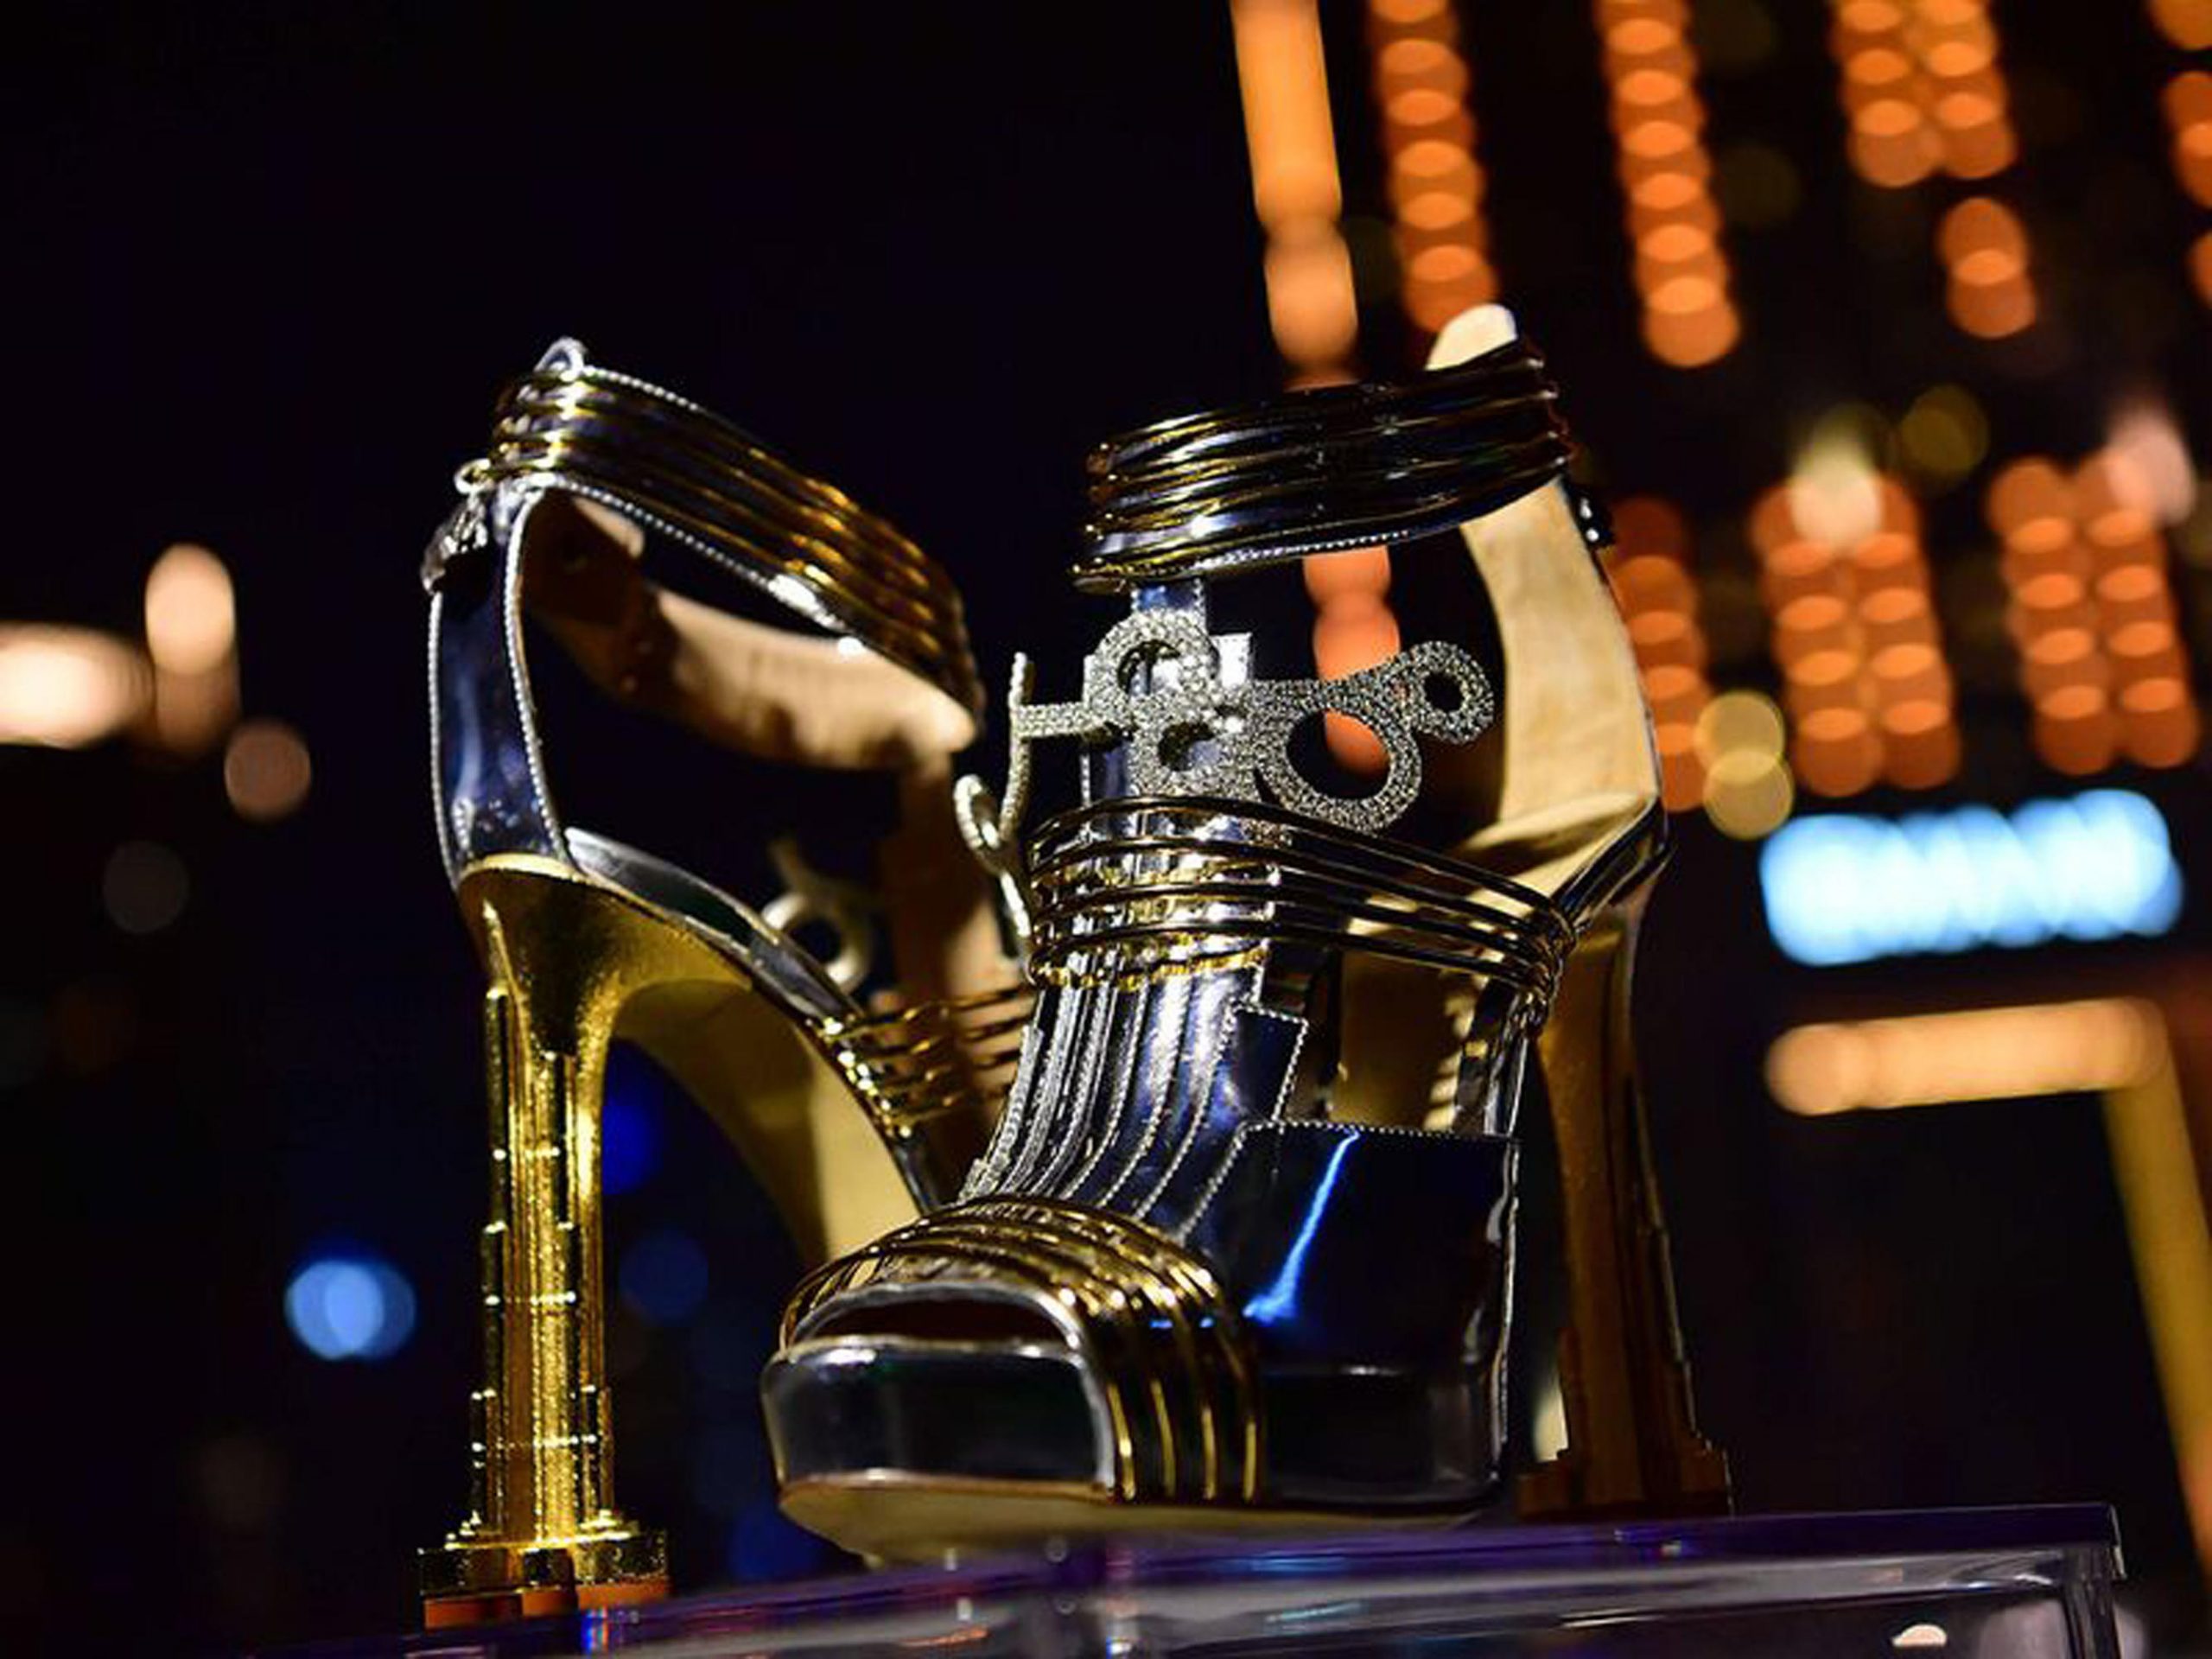 The Most Expensive Shoes EVER Were Showcased In Dubai | Cosmopolitan Middle East